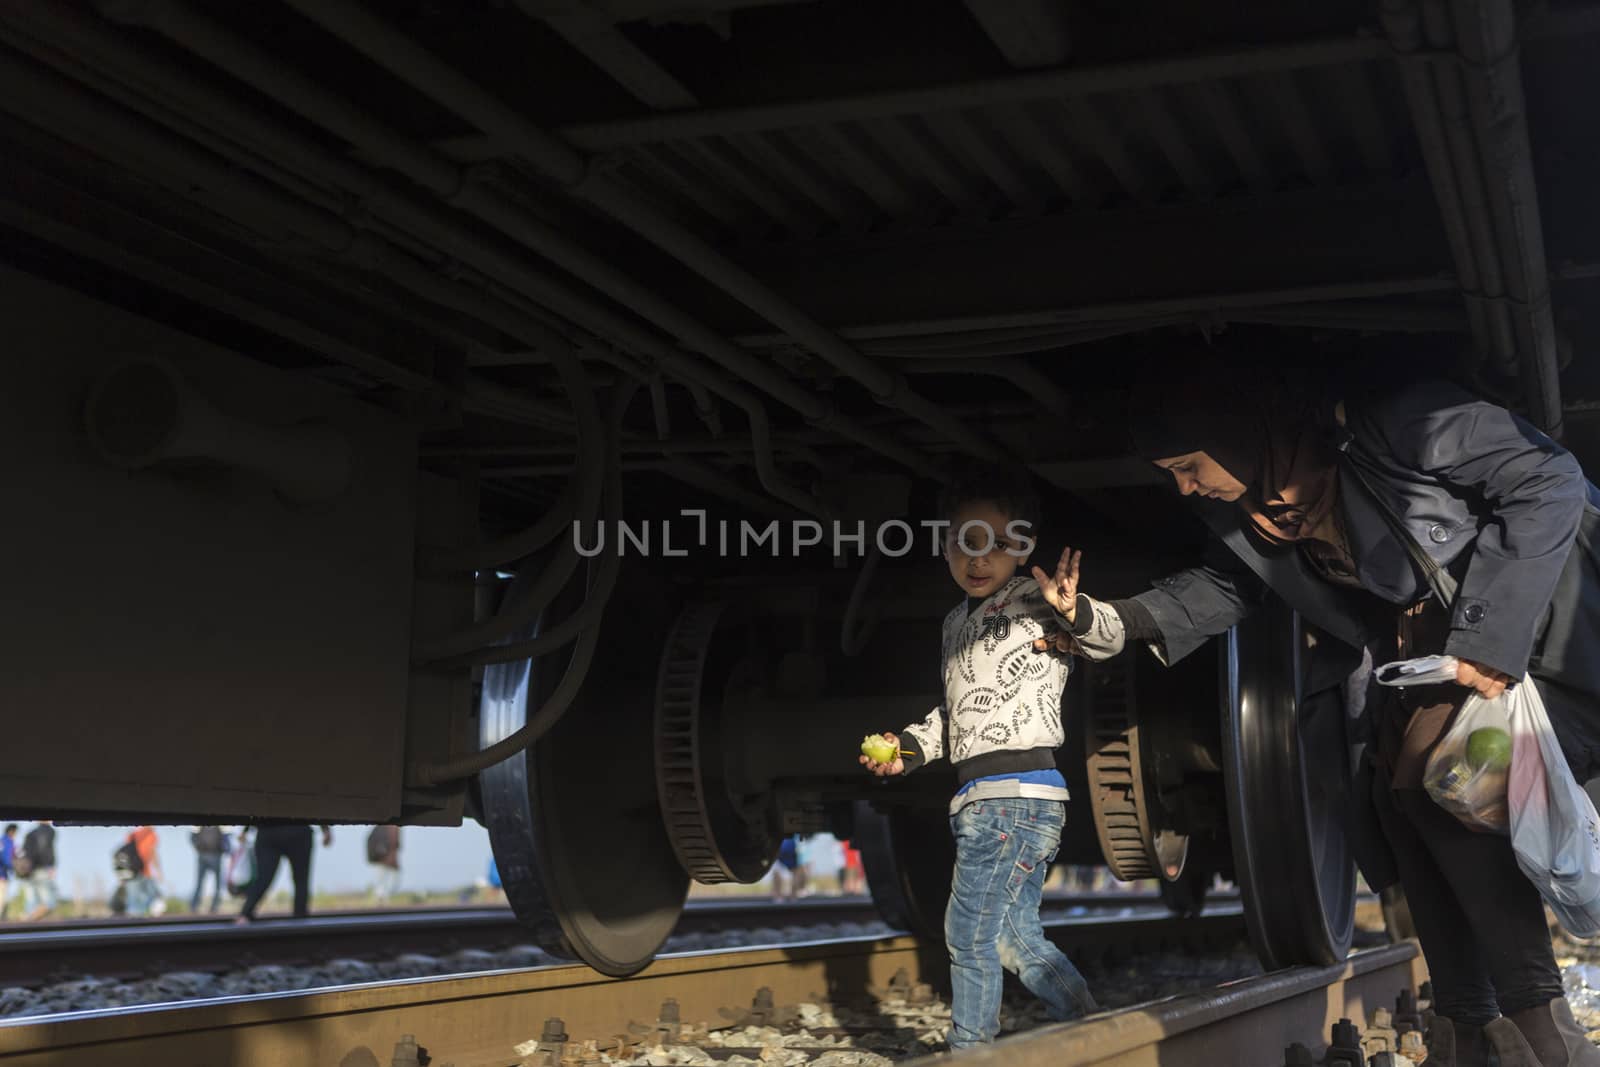 CROATIA, Tovarnik: Refugees attempt to hide under a train at a railway station in Tovarnik, Croatia near the Serbian-border as police move in on their position on September 18, 2015. Refugees are hoping to continue their journey to Germany and Northern Europe via Slovenia  